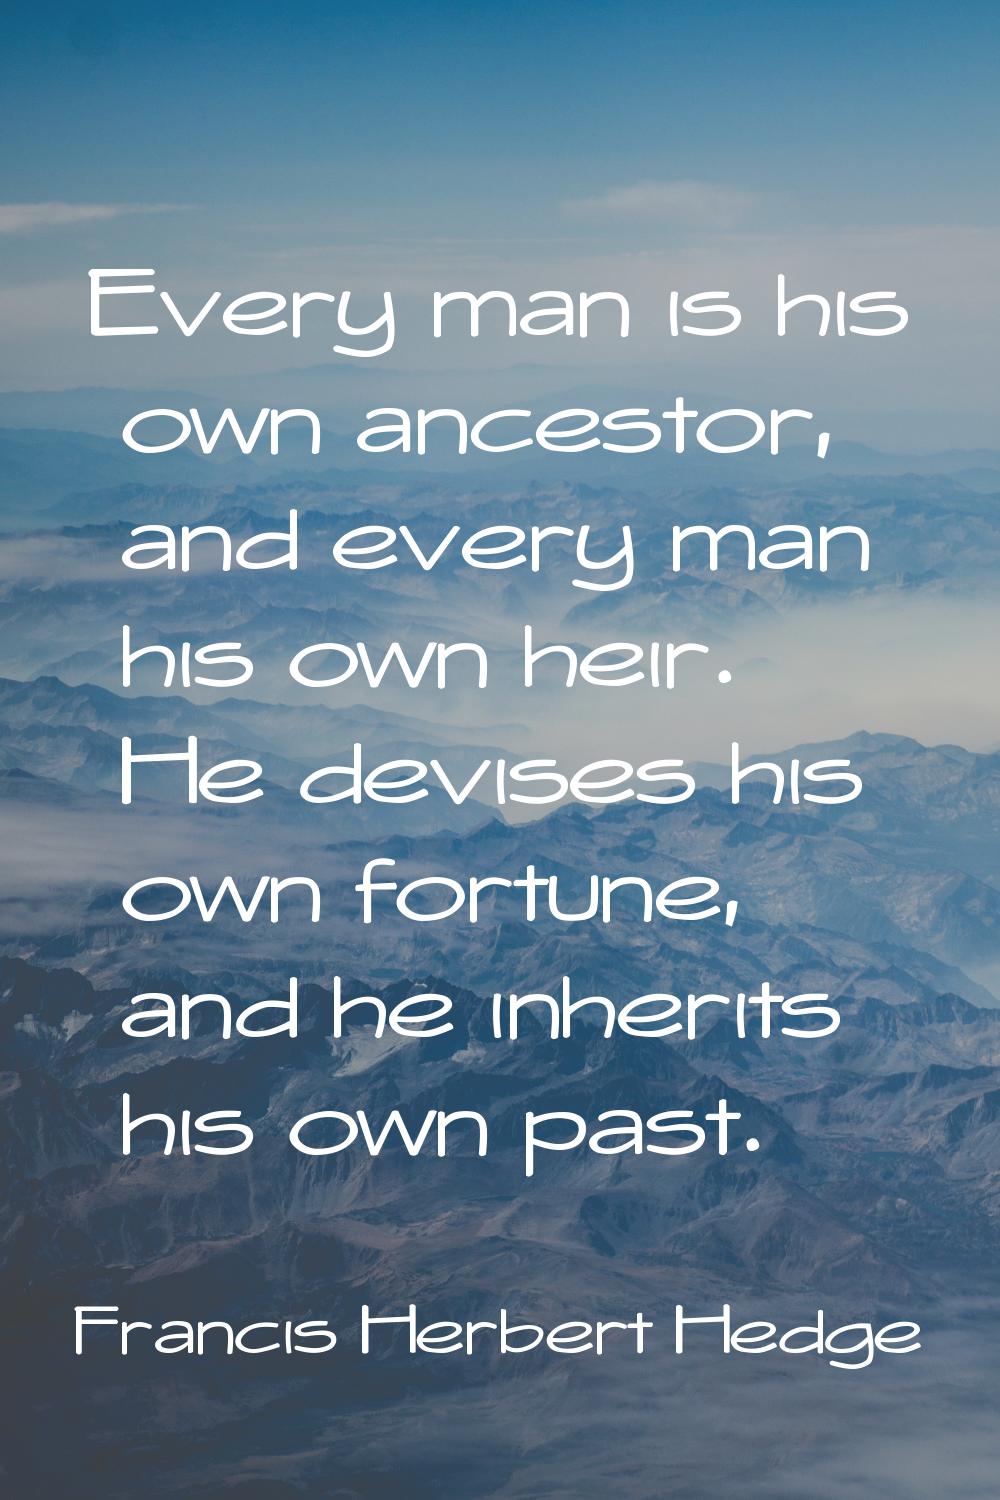 Every man is his own ancestor, and every man his own heir. He devises his own fortune, and he inher